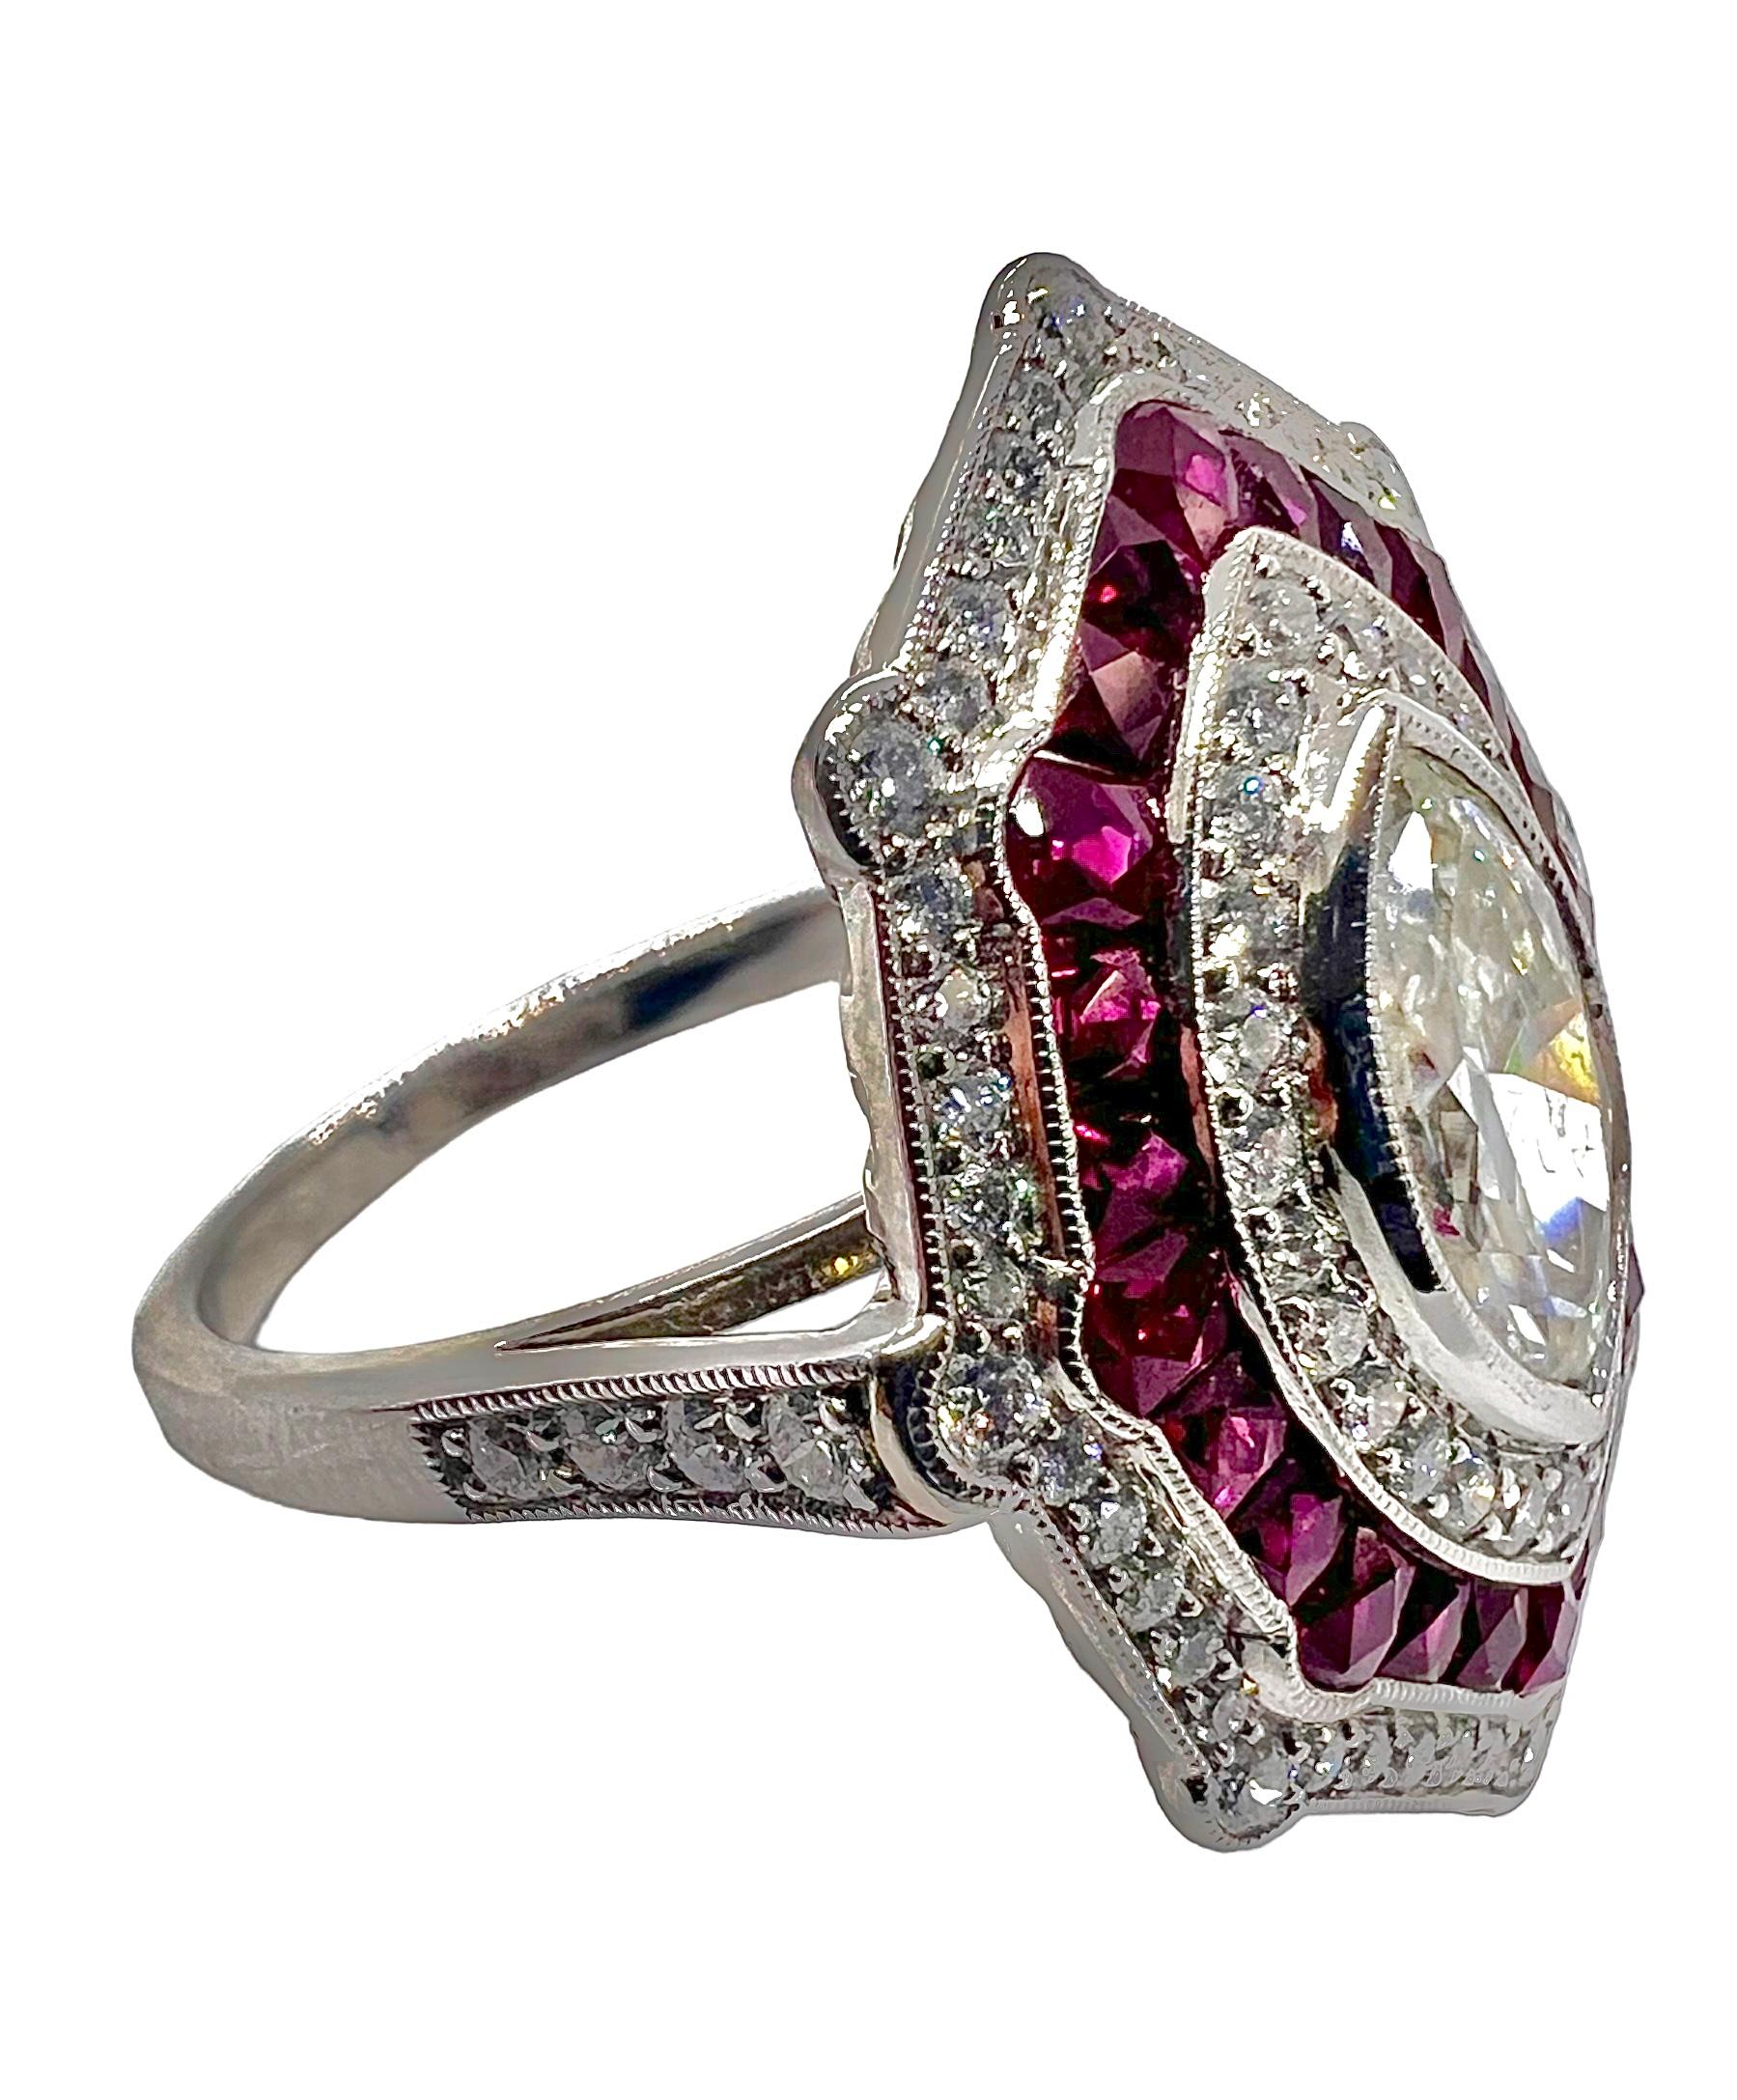 Platinum art deco ring with a marquise cut diamond center that weighs 1.01 carats surrounded with 0.51 carat diamonds and 1.10 carat rubies.

Sophia D by Joseph Dardashti LTD has been known worldwide for 35 years and are inspired by classic Art Deco